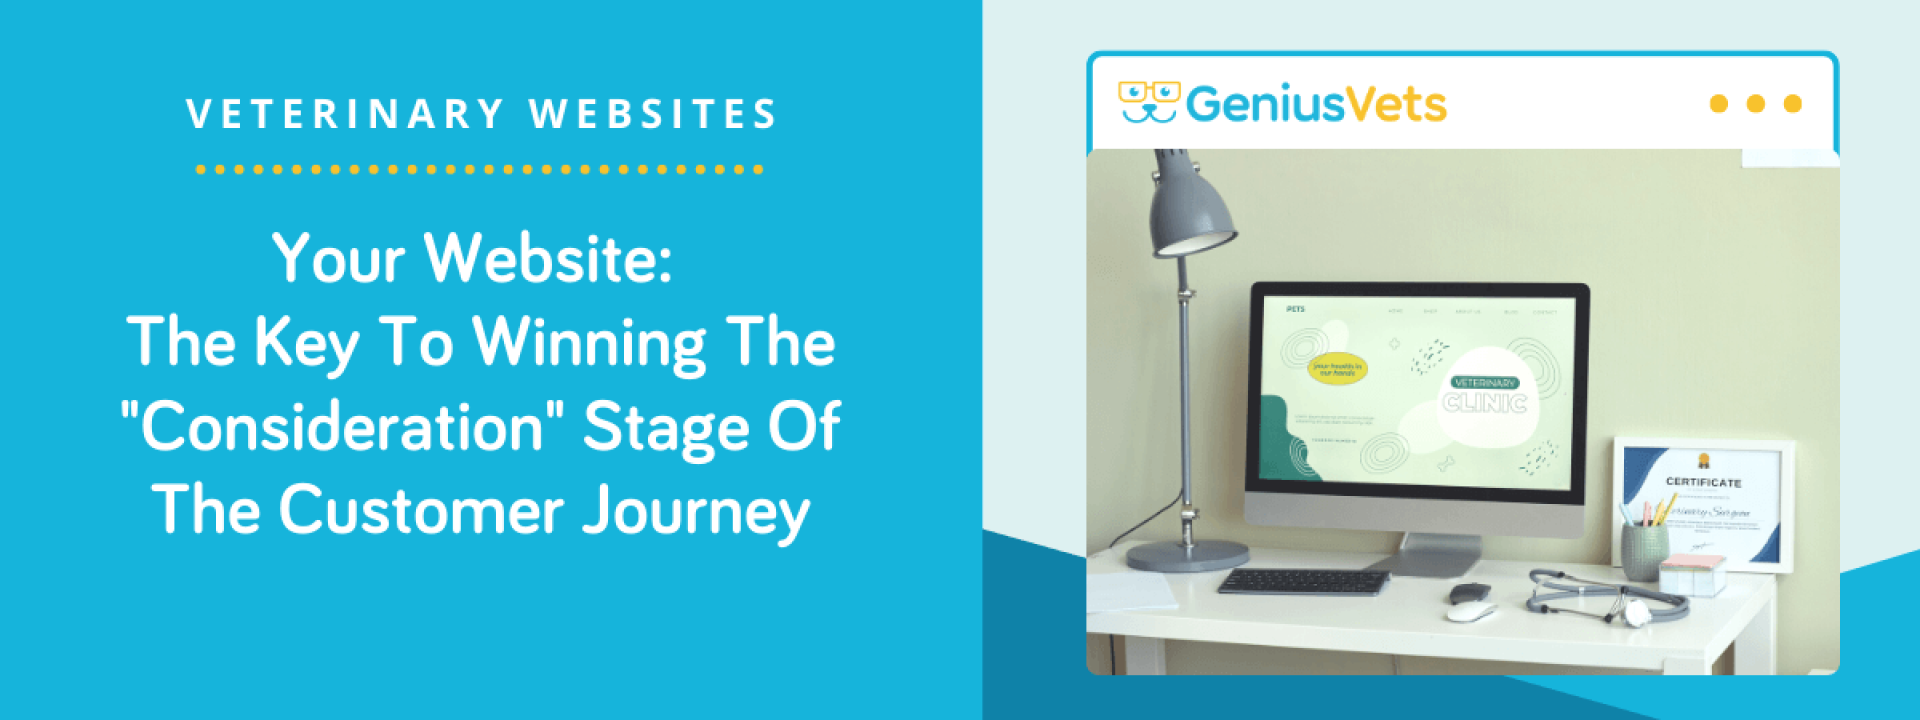 Your Website: The Key To Winning The "Consideration" Stage Of The Customer Journey